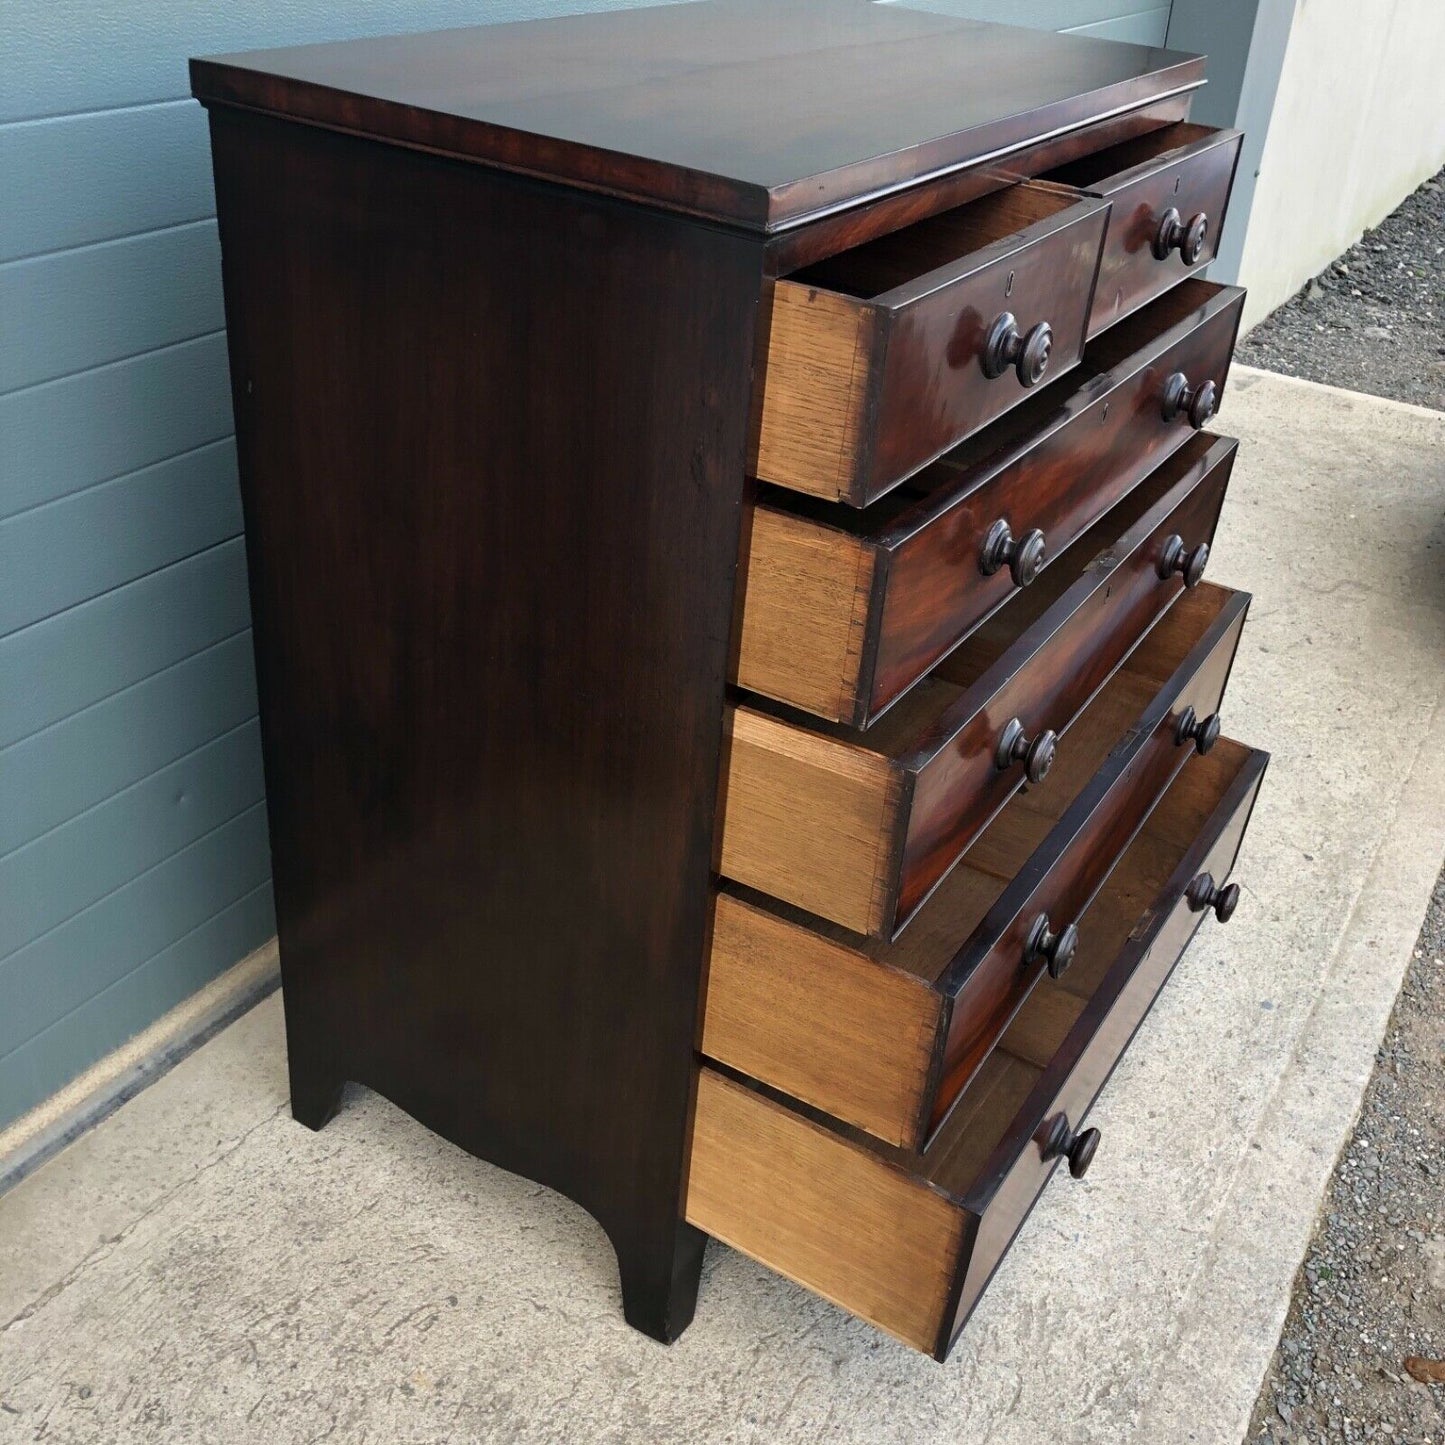 Stunning Regency Mahogany Chest Of Drawers / Antique Chest ( SOLD )